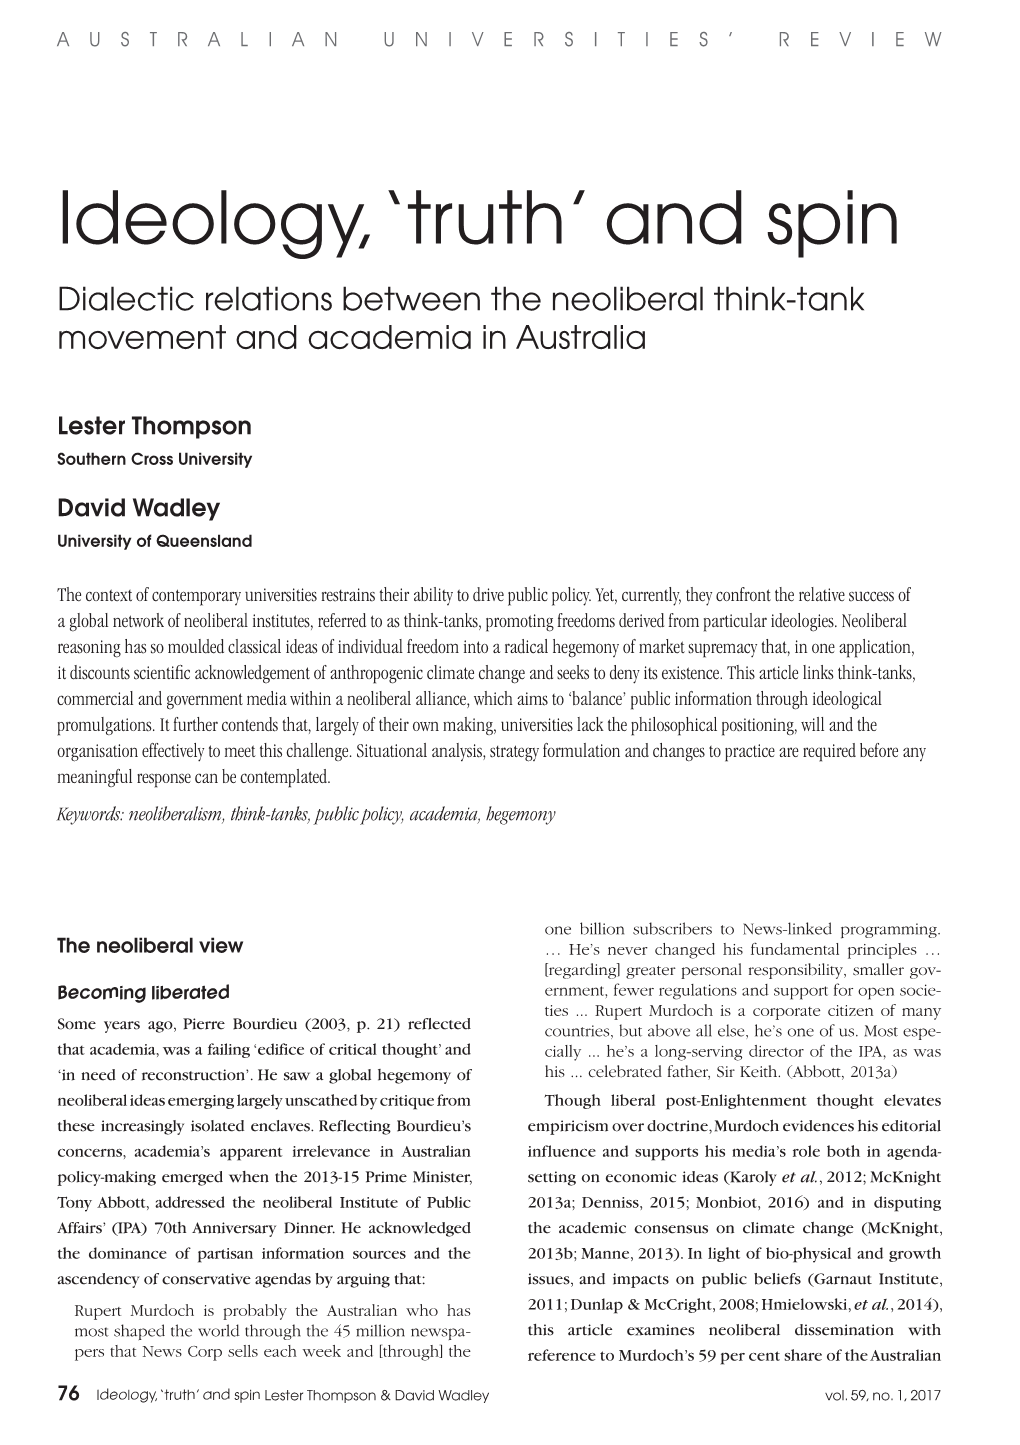 Ideology, ‘Truth’ and Spin Dialectic Relations Between the Neoliberal Think-Tank Movement and Academia in Australia